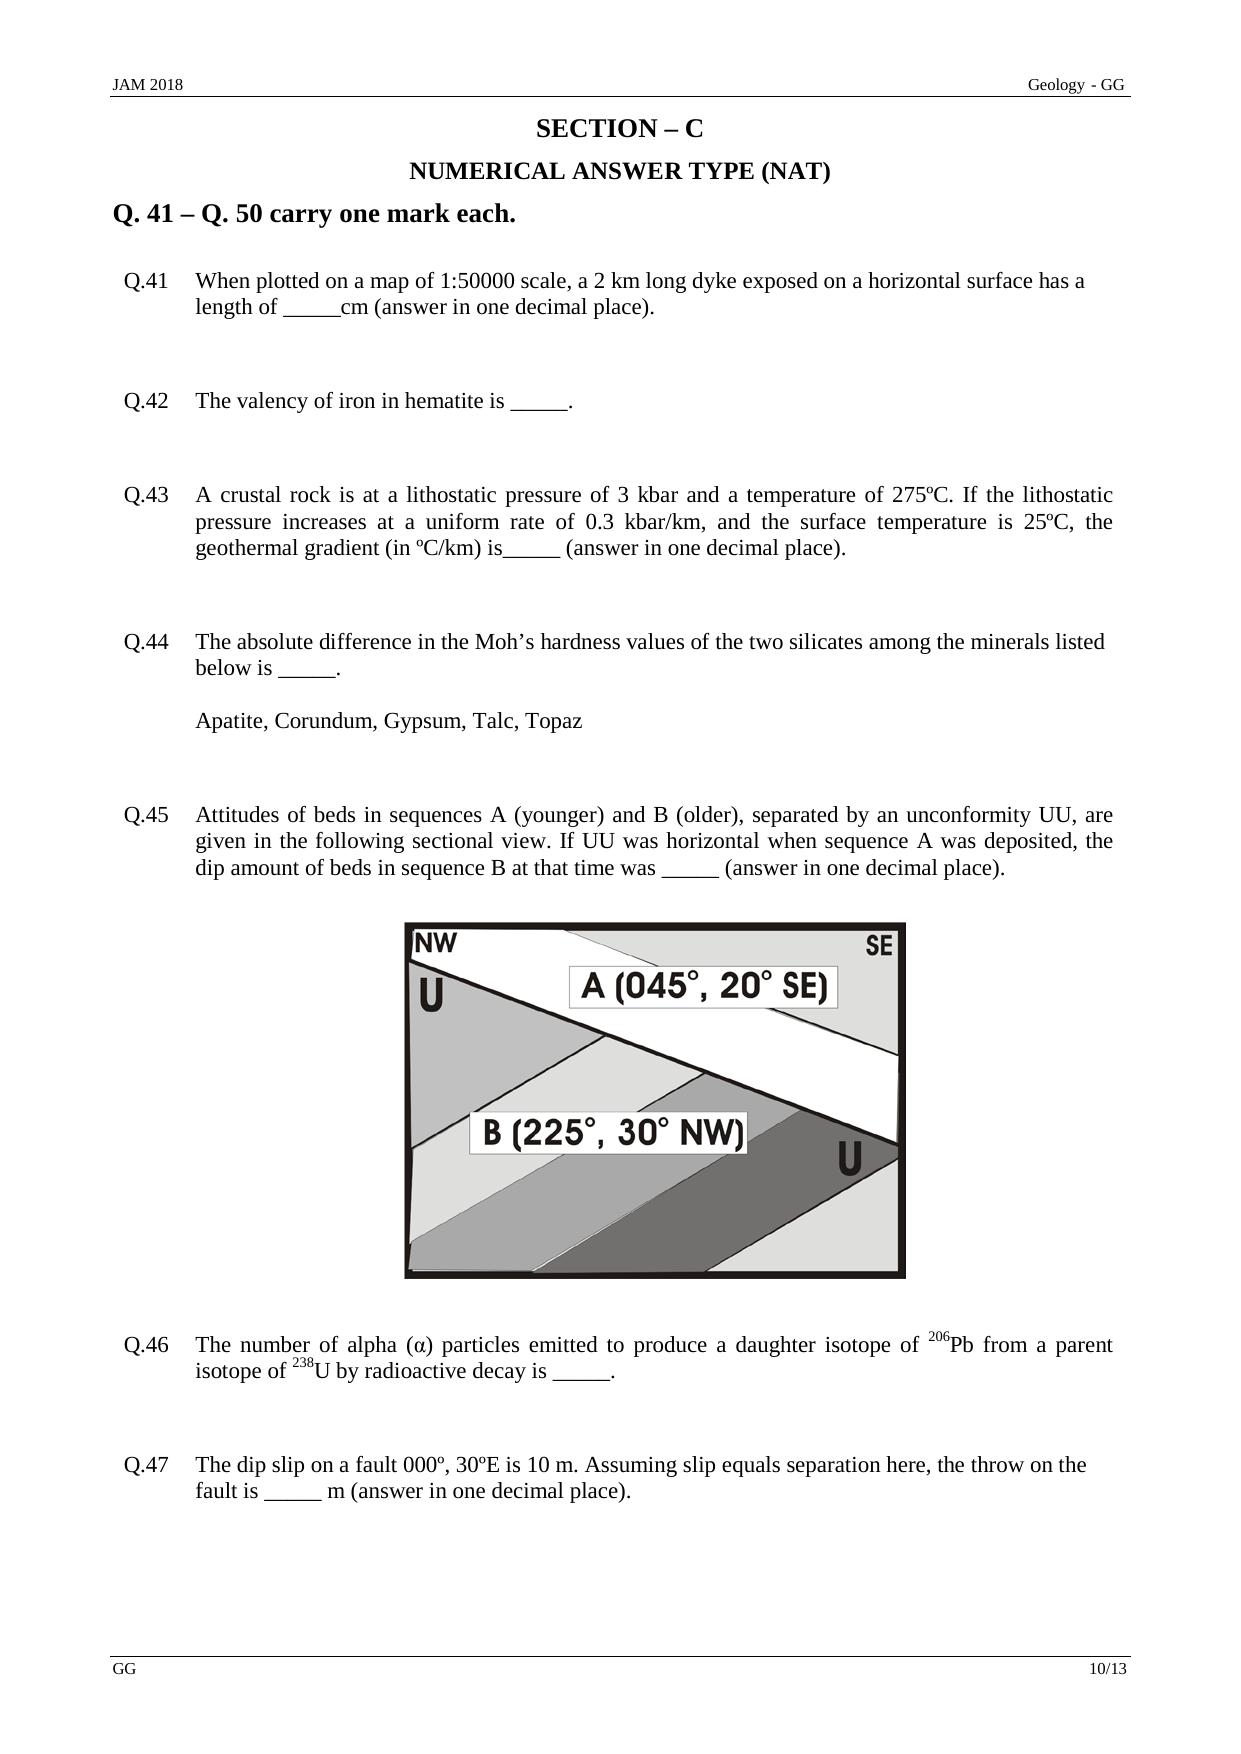 JAM 2018: GG Question Paper - Page 10